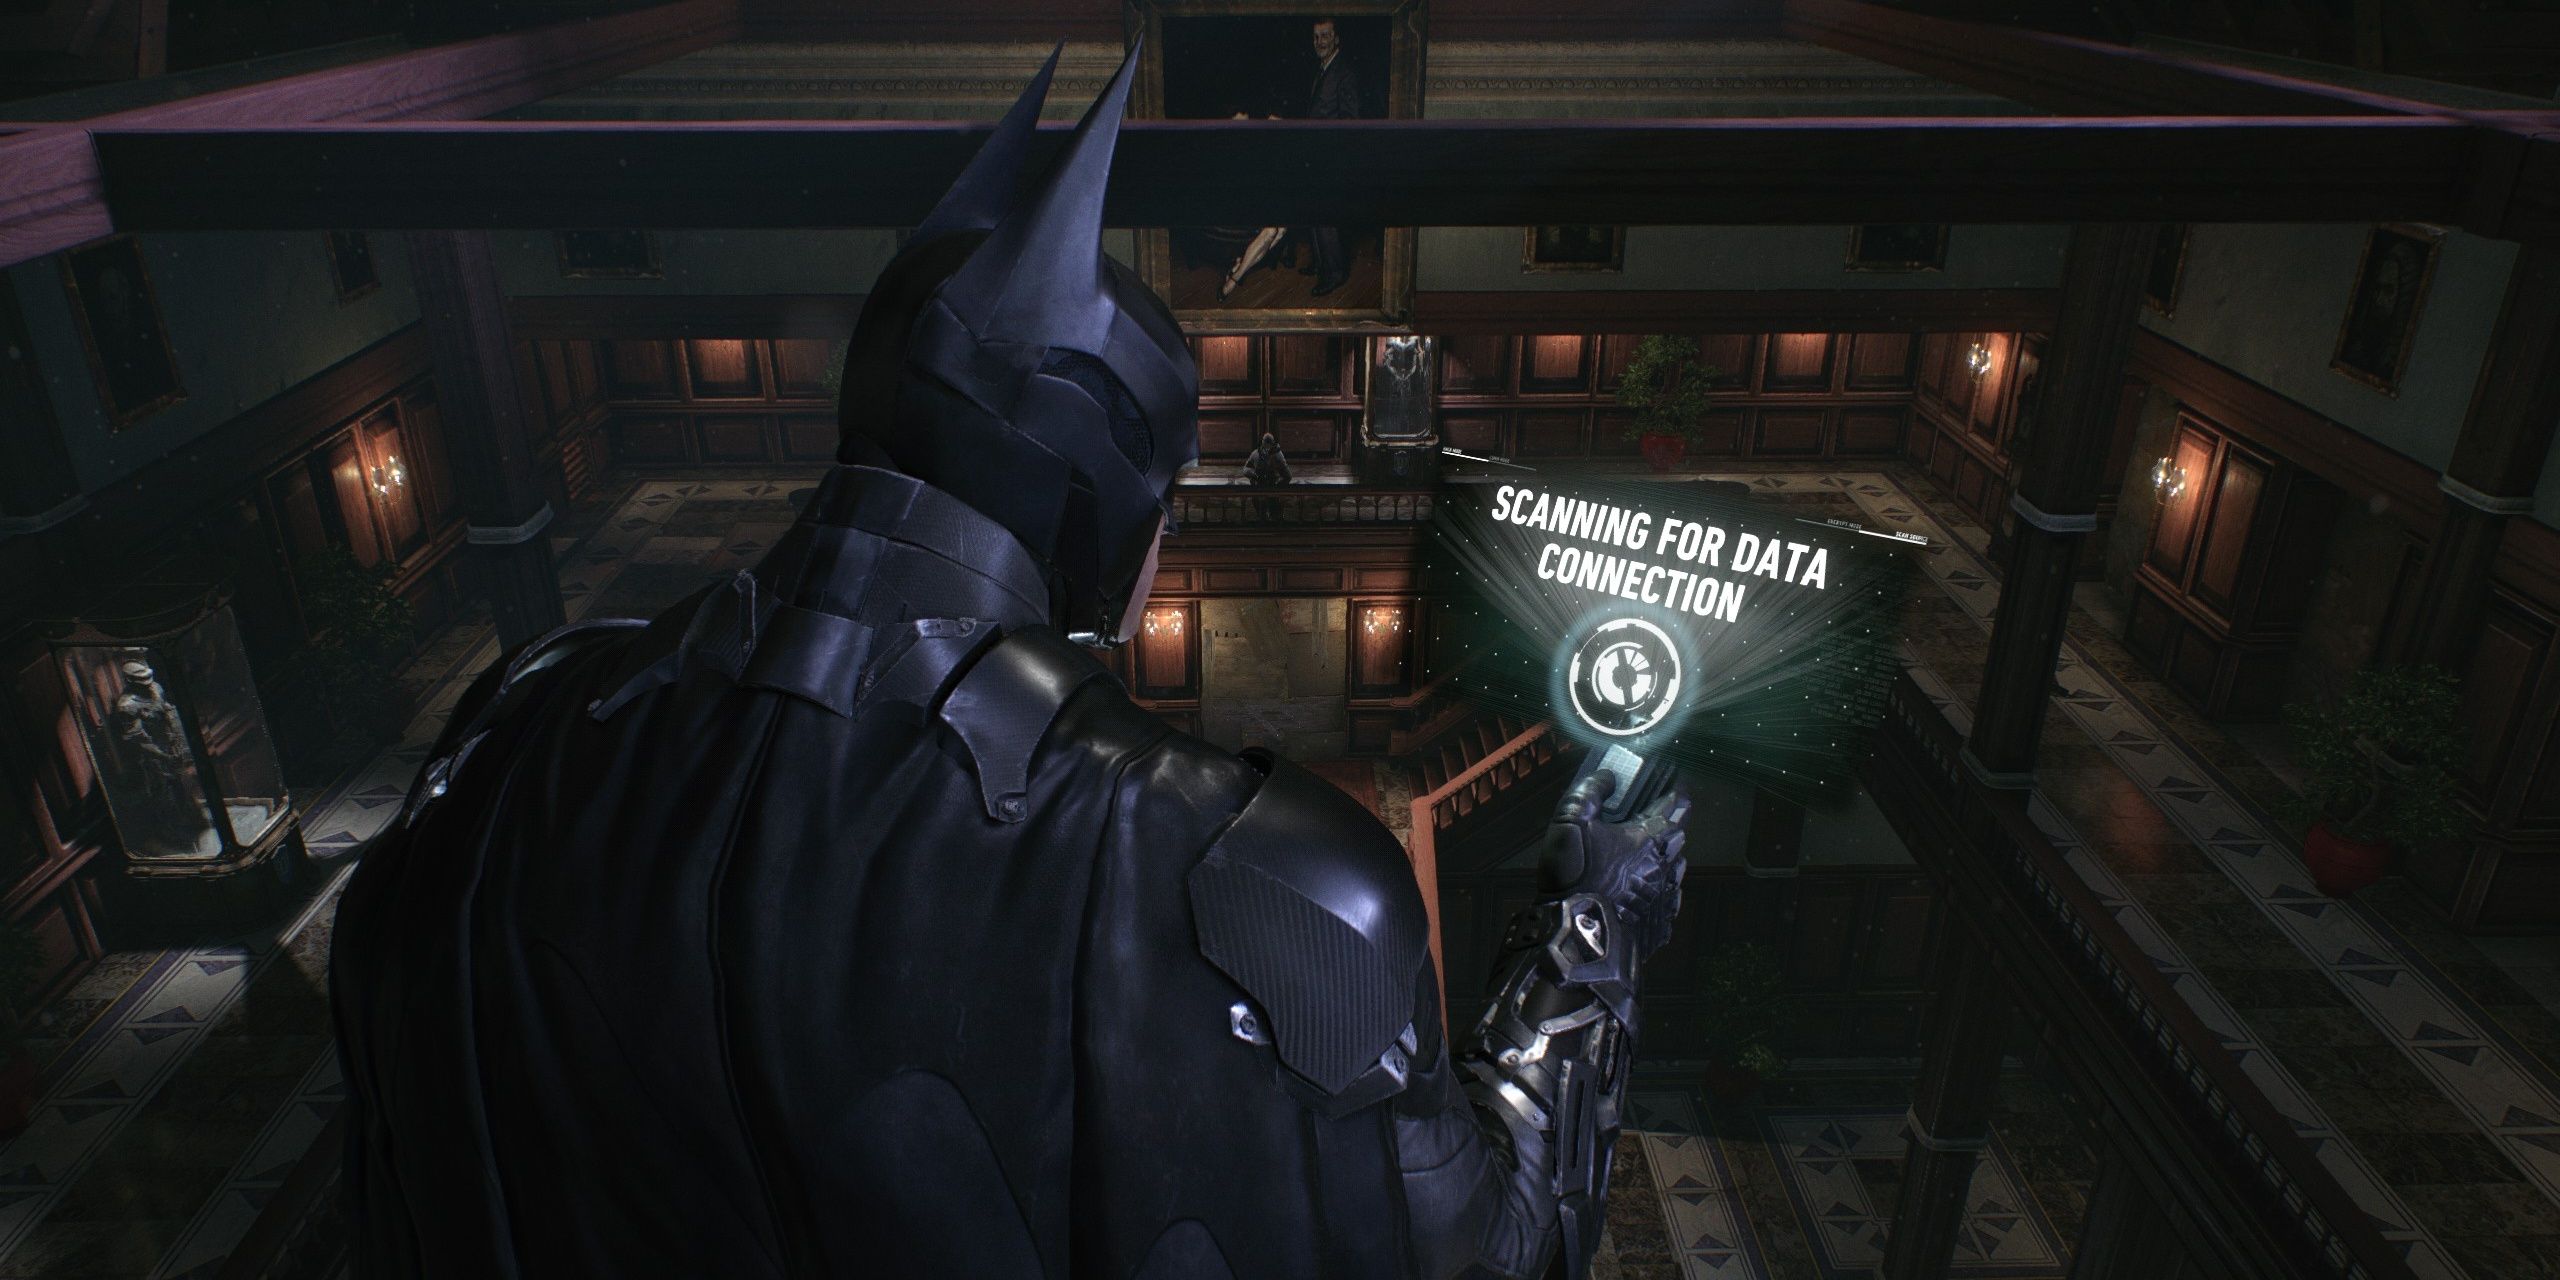 batman using the remote hacking device